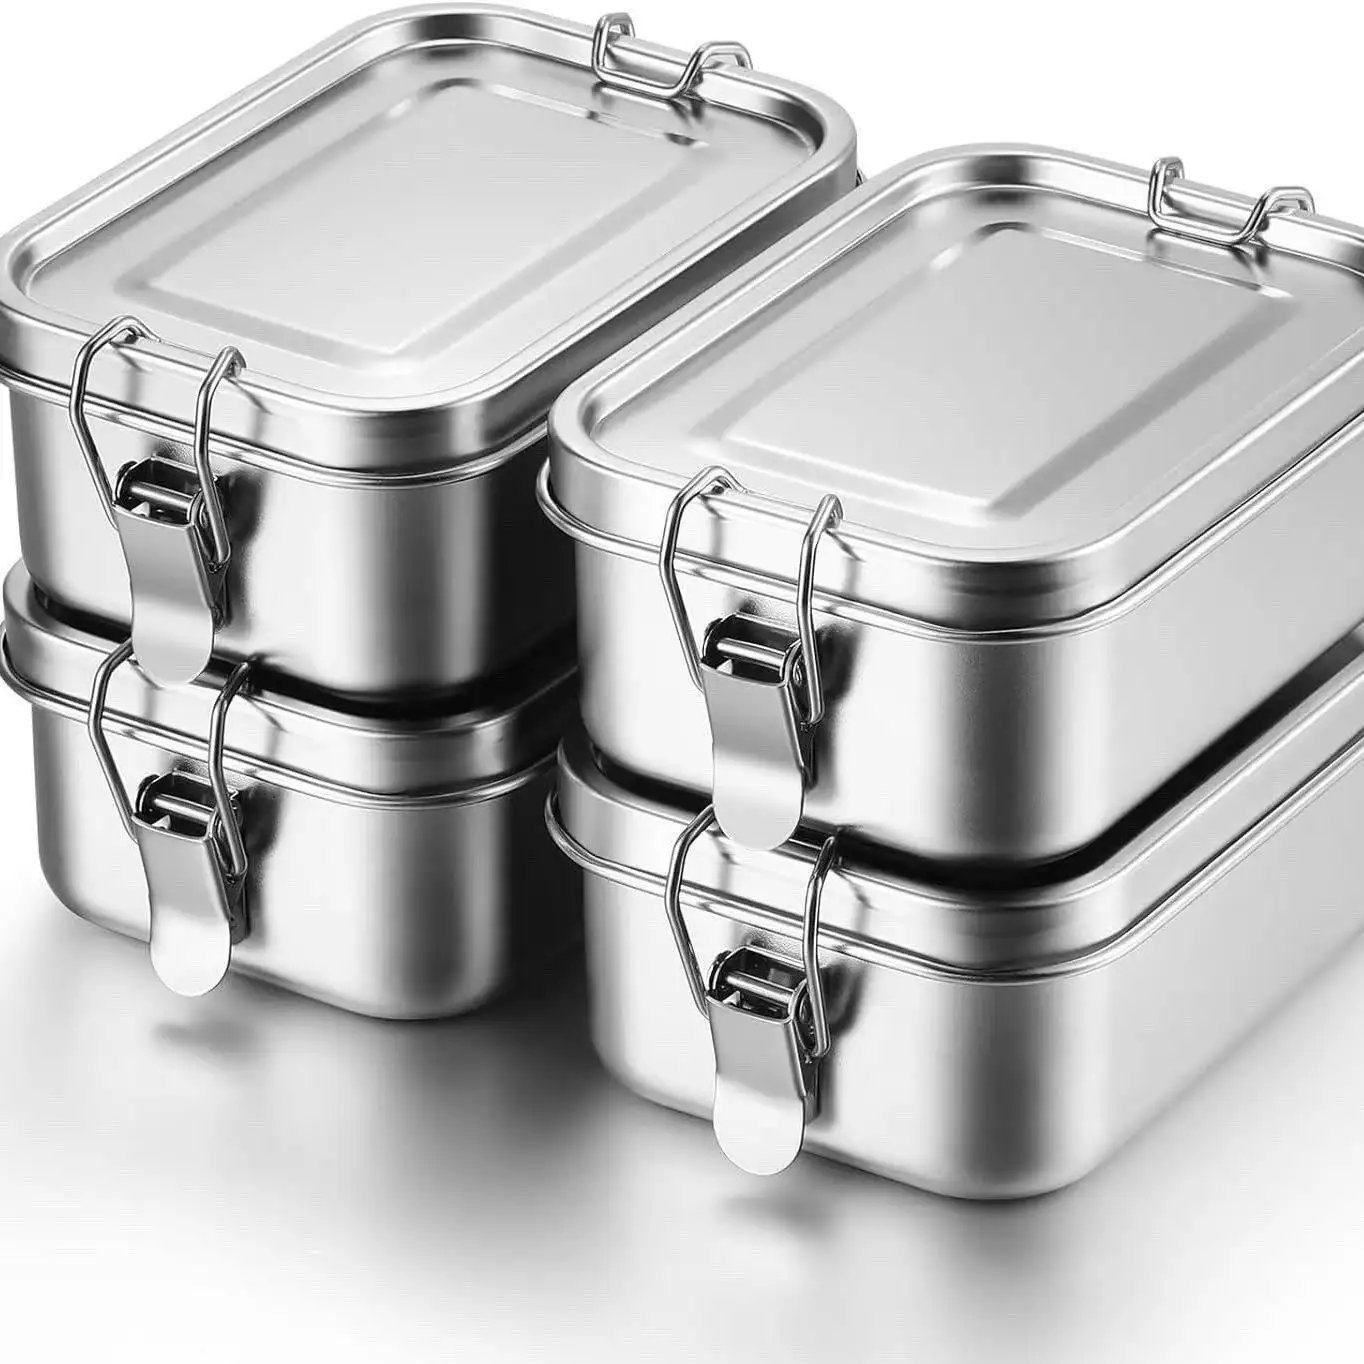 Ailingalaxy Stainless Steel Lunch Box Bento Container with no Compartment 3 Compartments Bento Lunchbox Kid